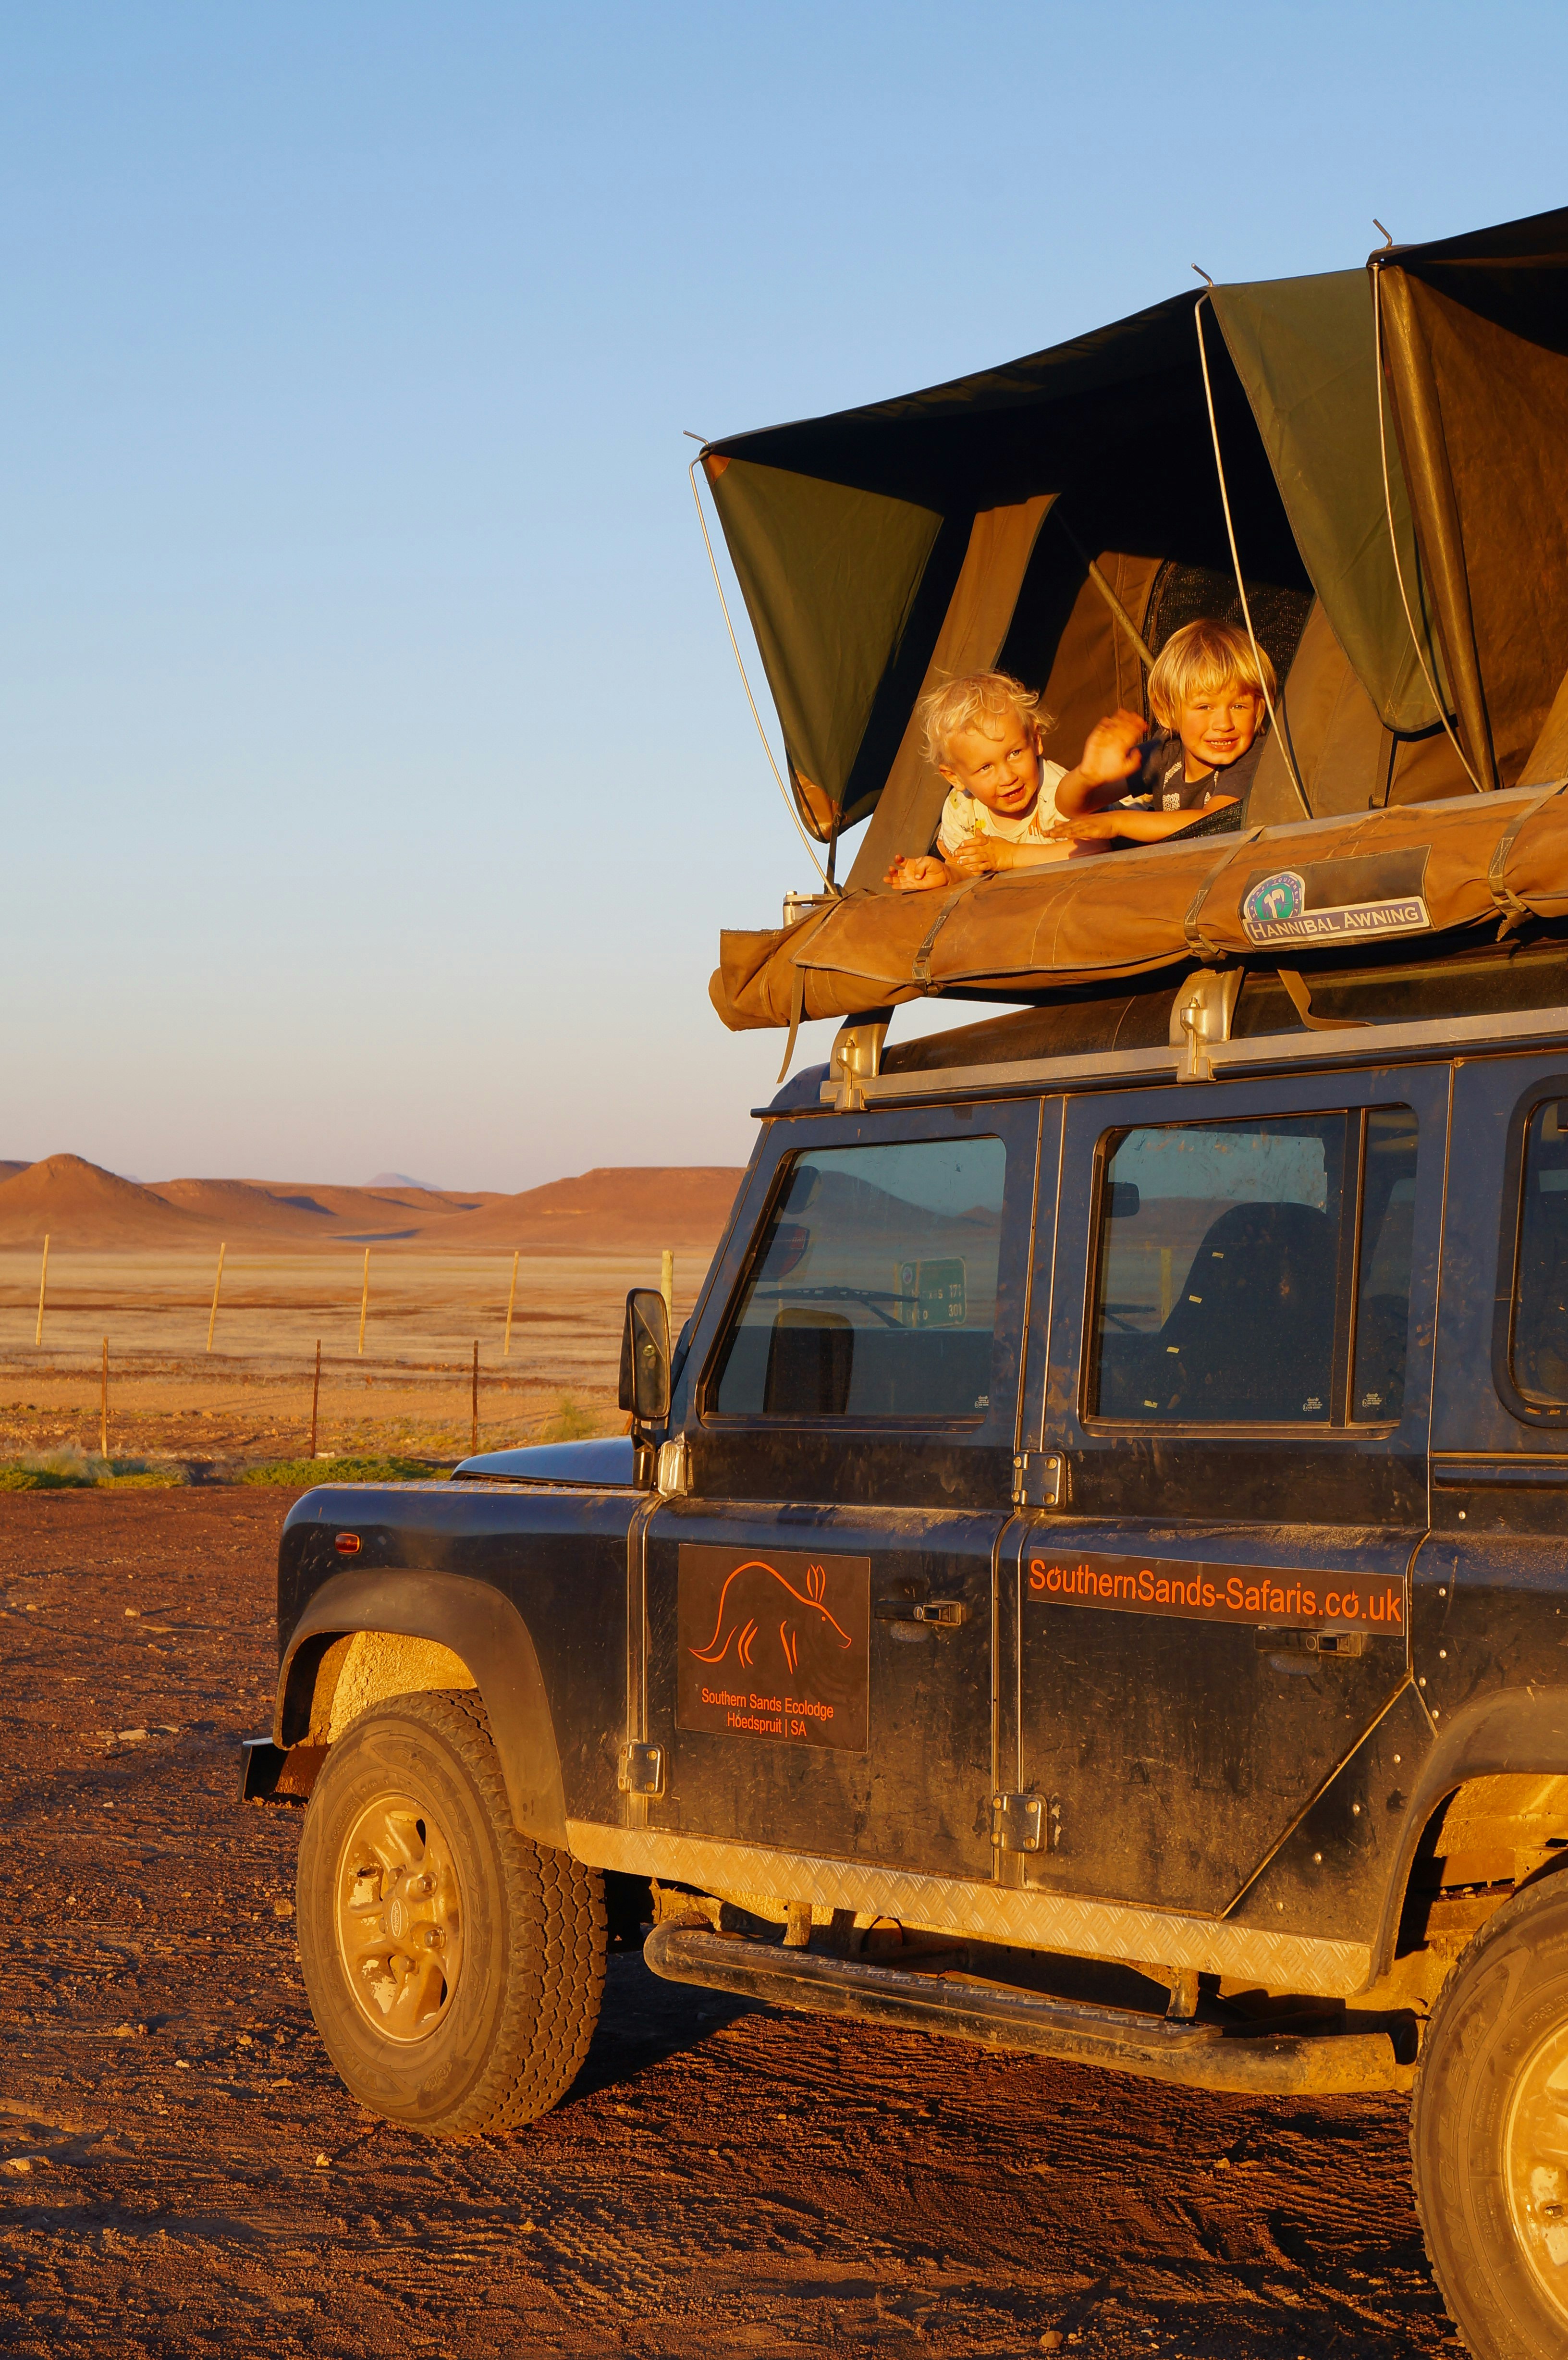 Two small boys sit in a rooftop tent atop a 4WD vehicle.